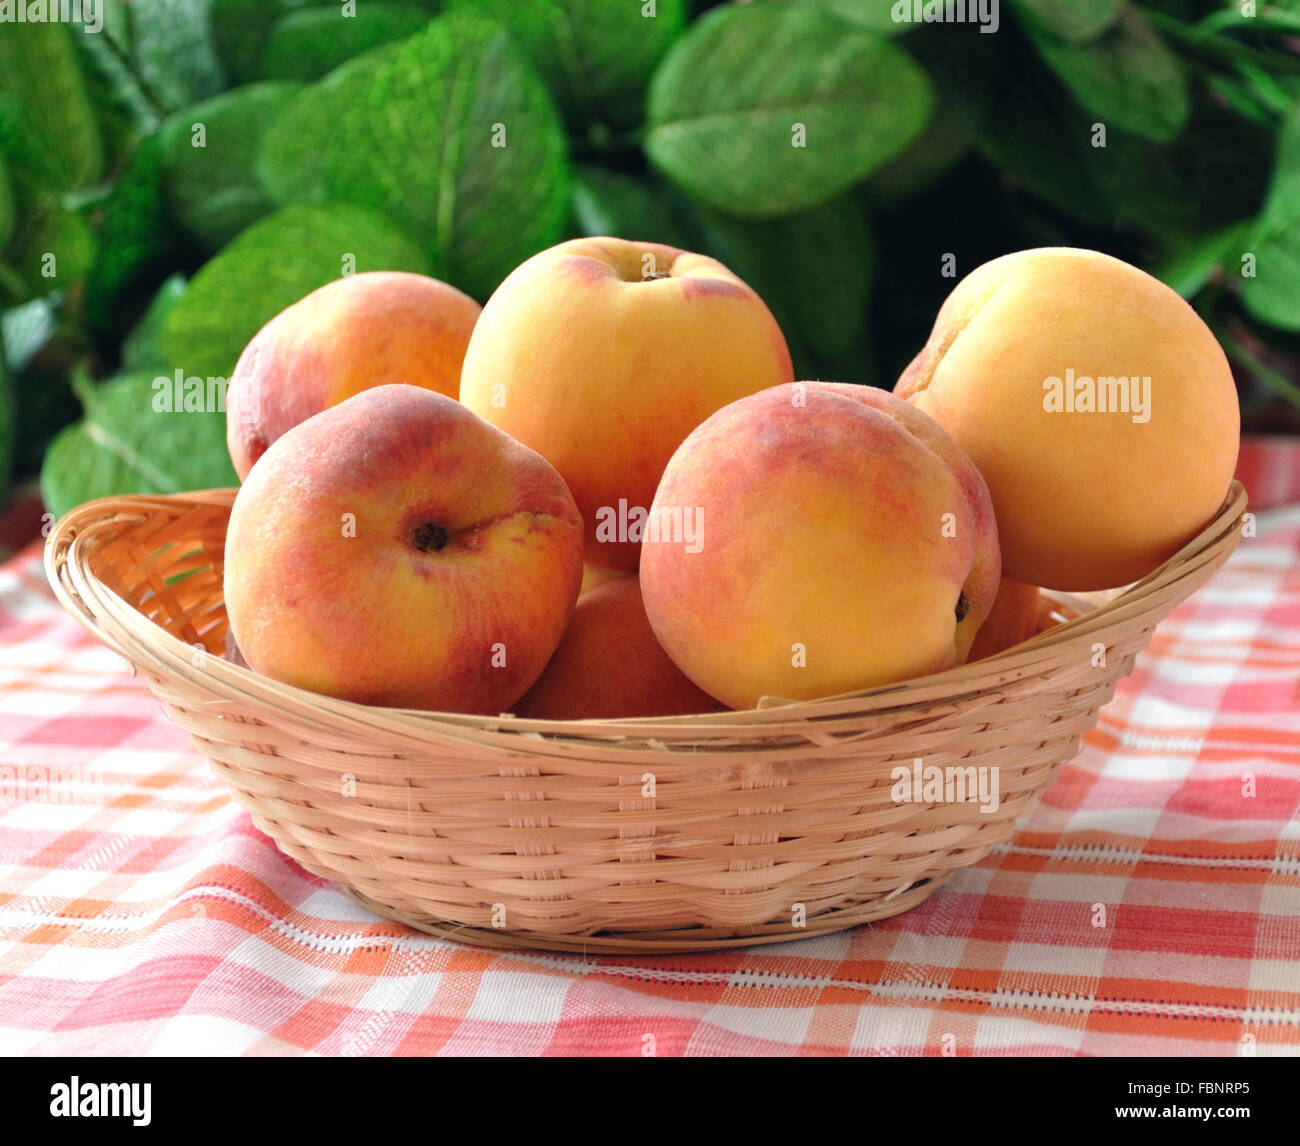 With peaches in a wicker basket on the tablecloth, on a background of foliage Stock Photo